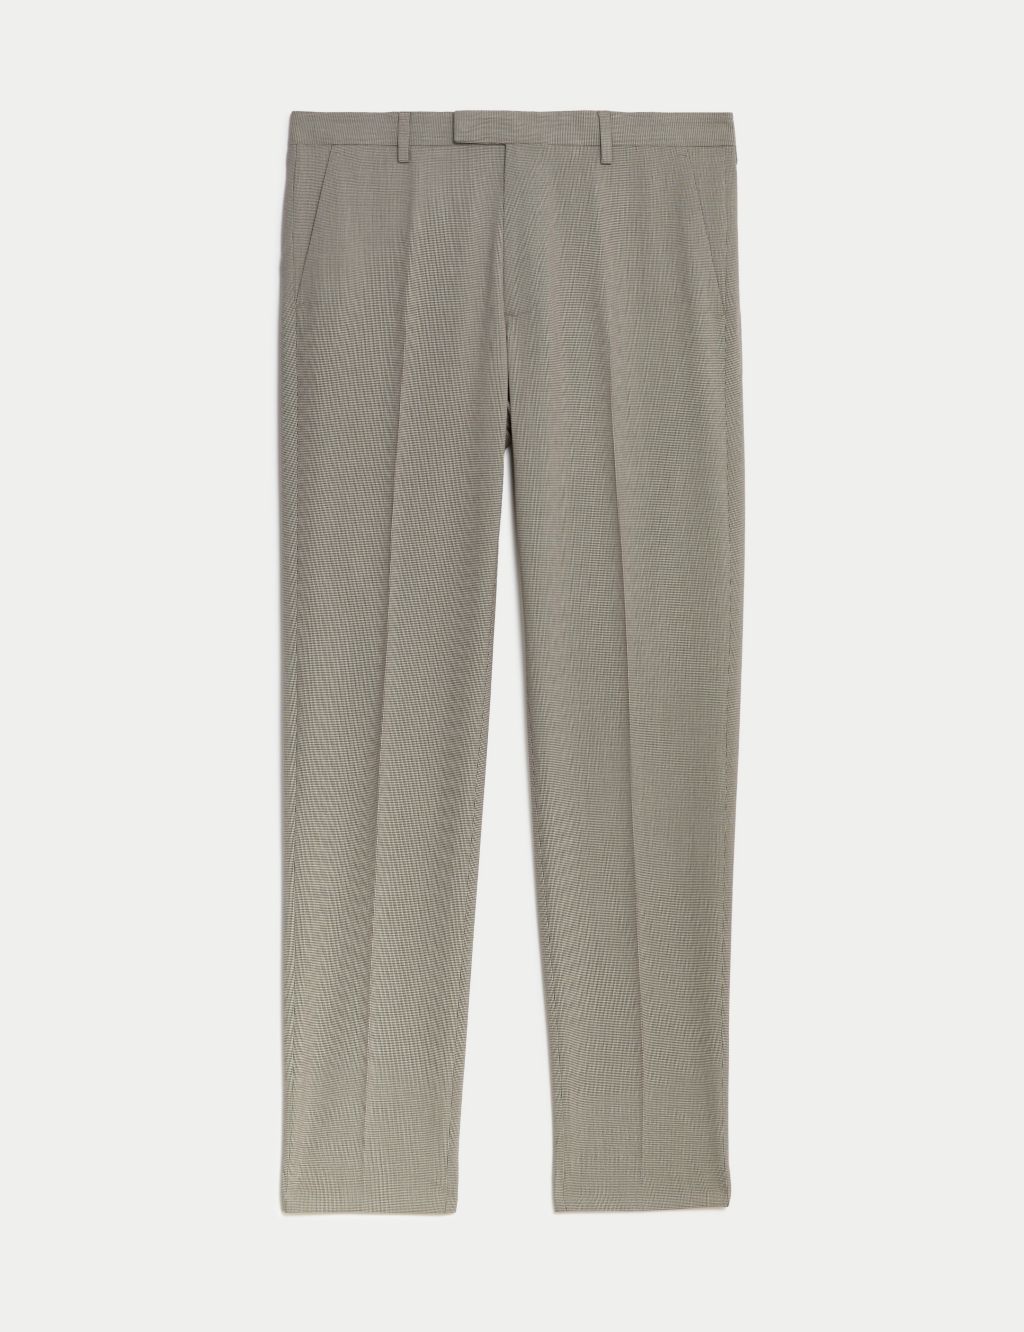 Textured Flat Front Stretch Trousers 1 of 7